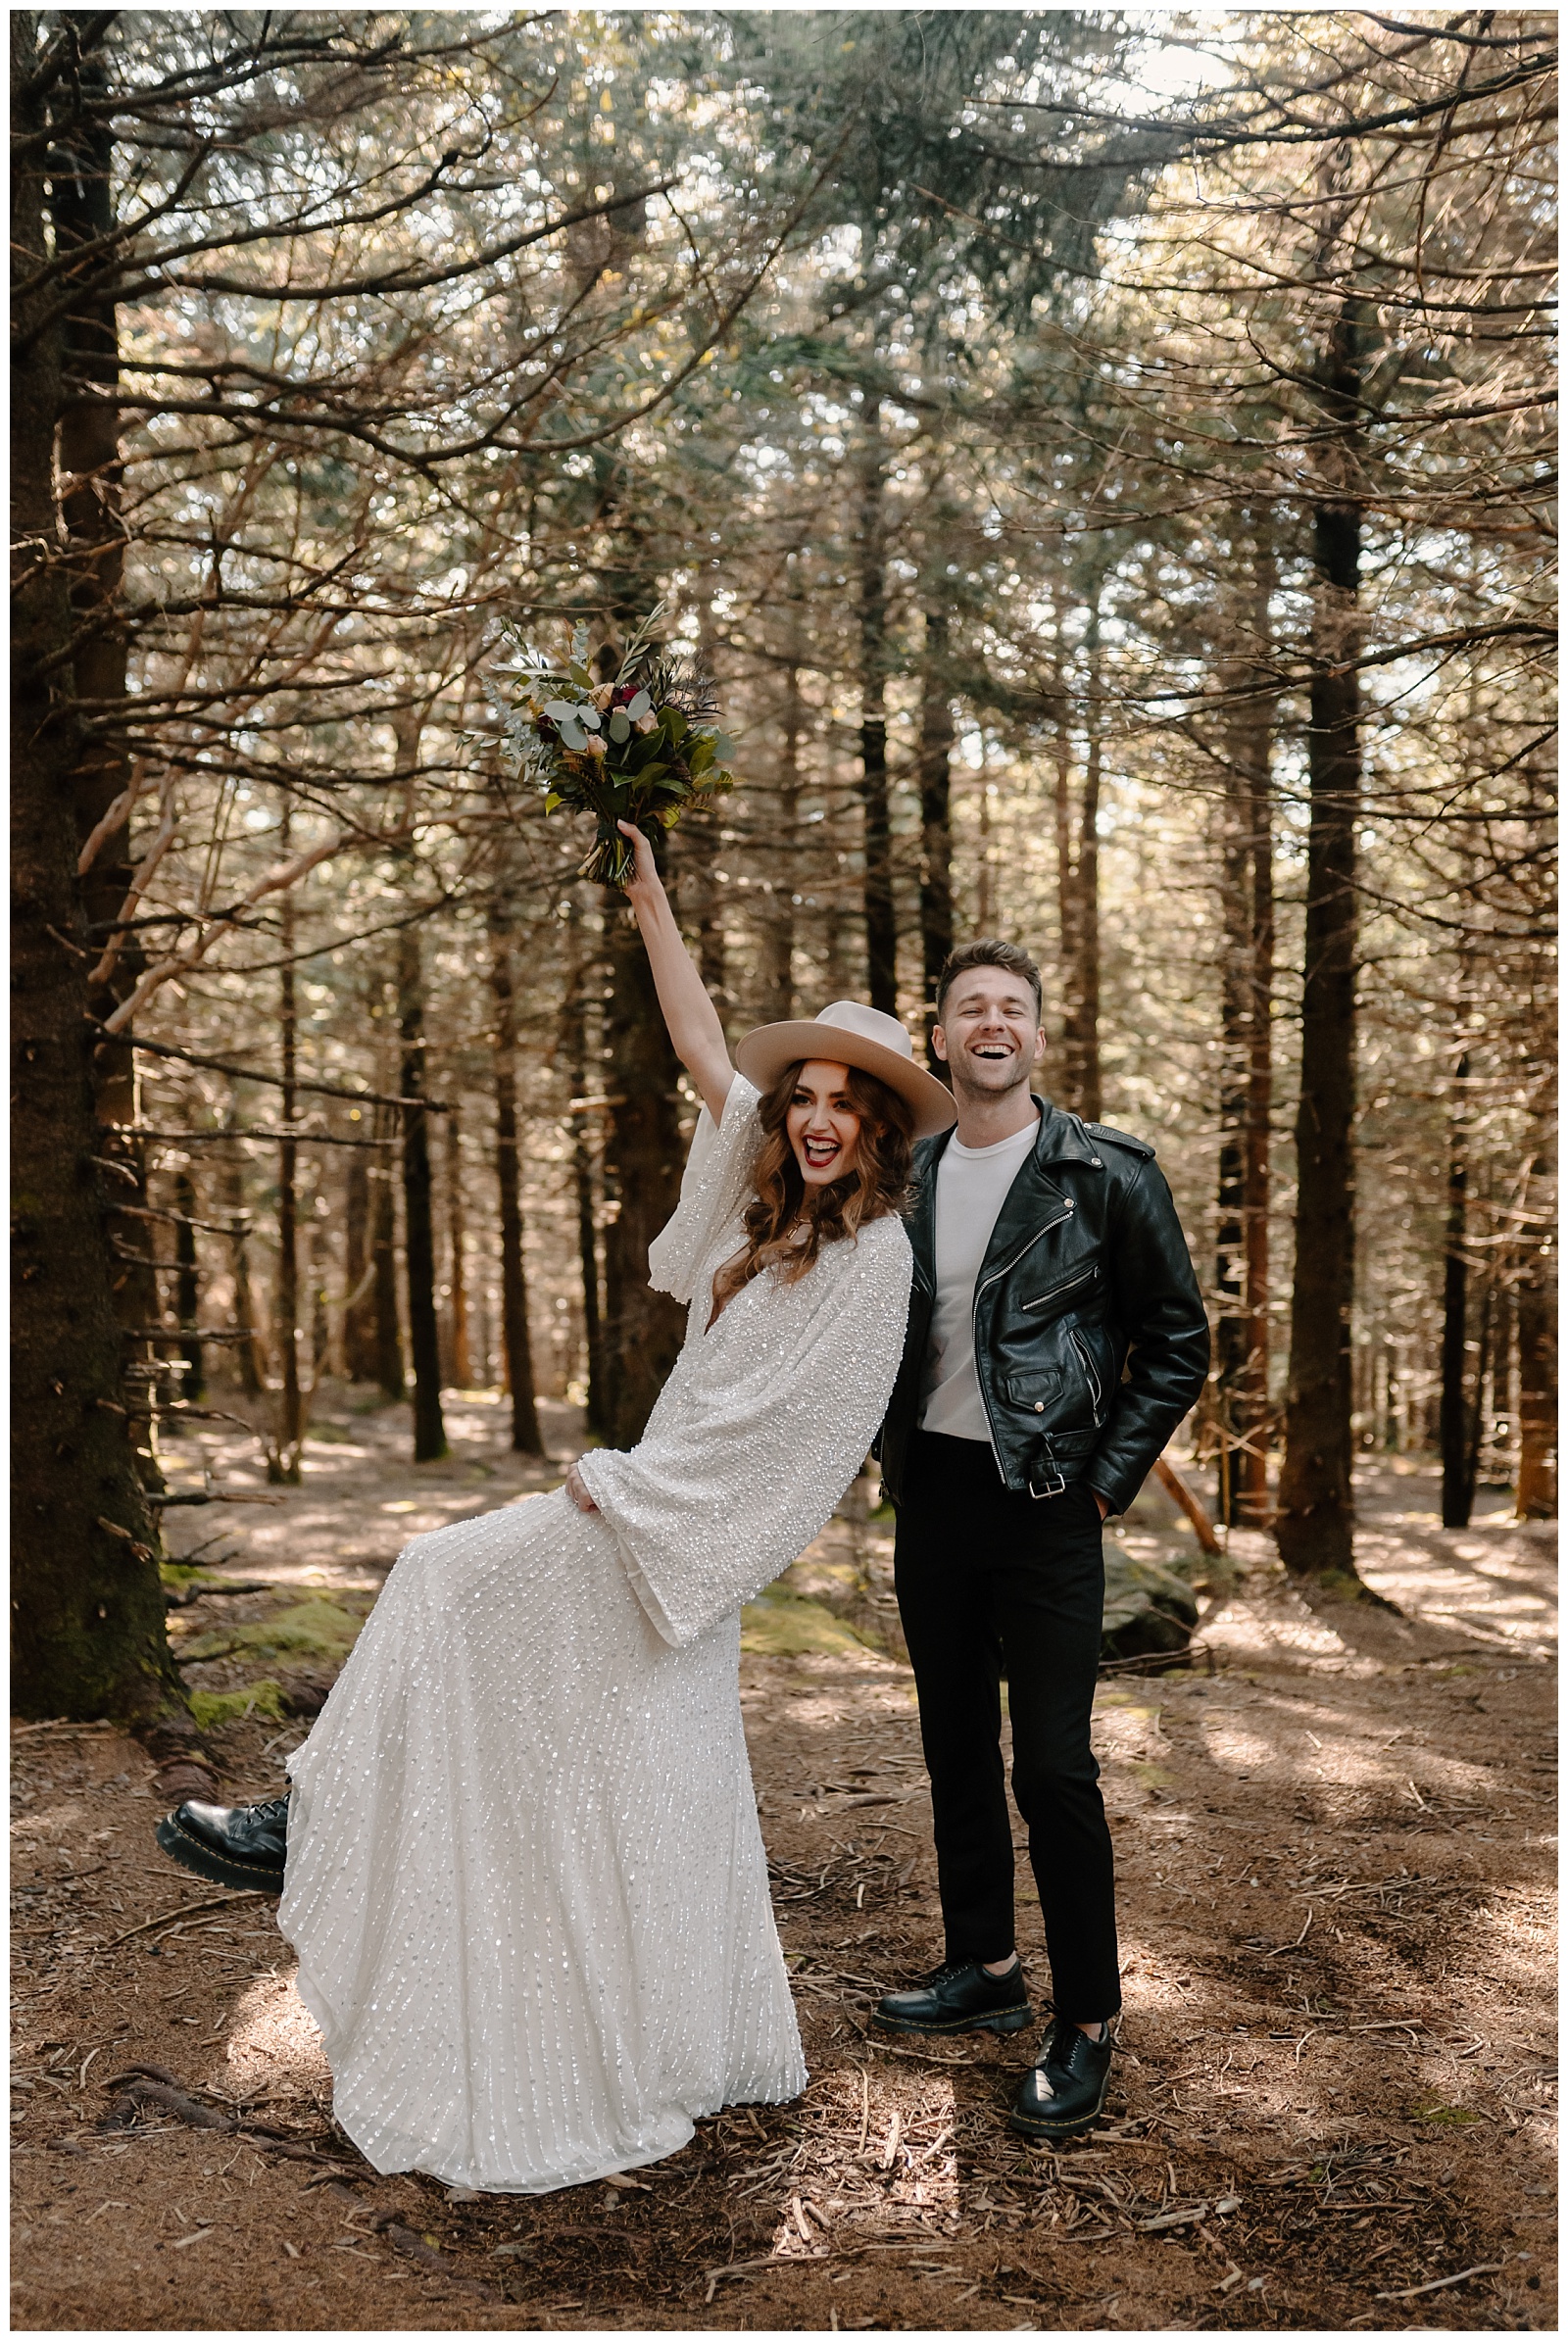 bride and groom celebrate eloping in the woods throwing flowers in the air